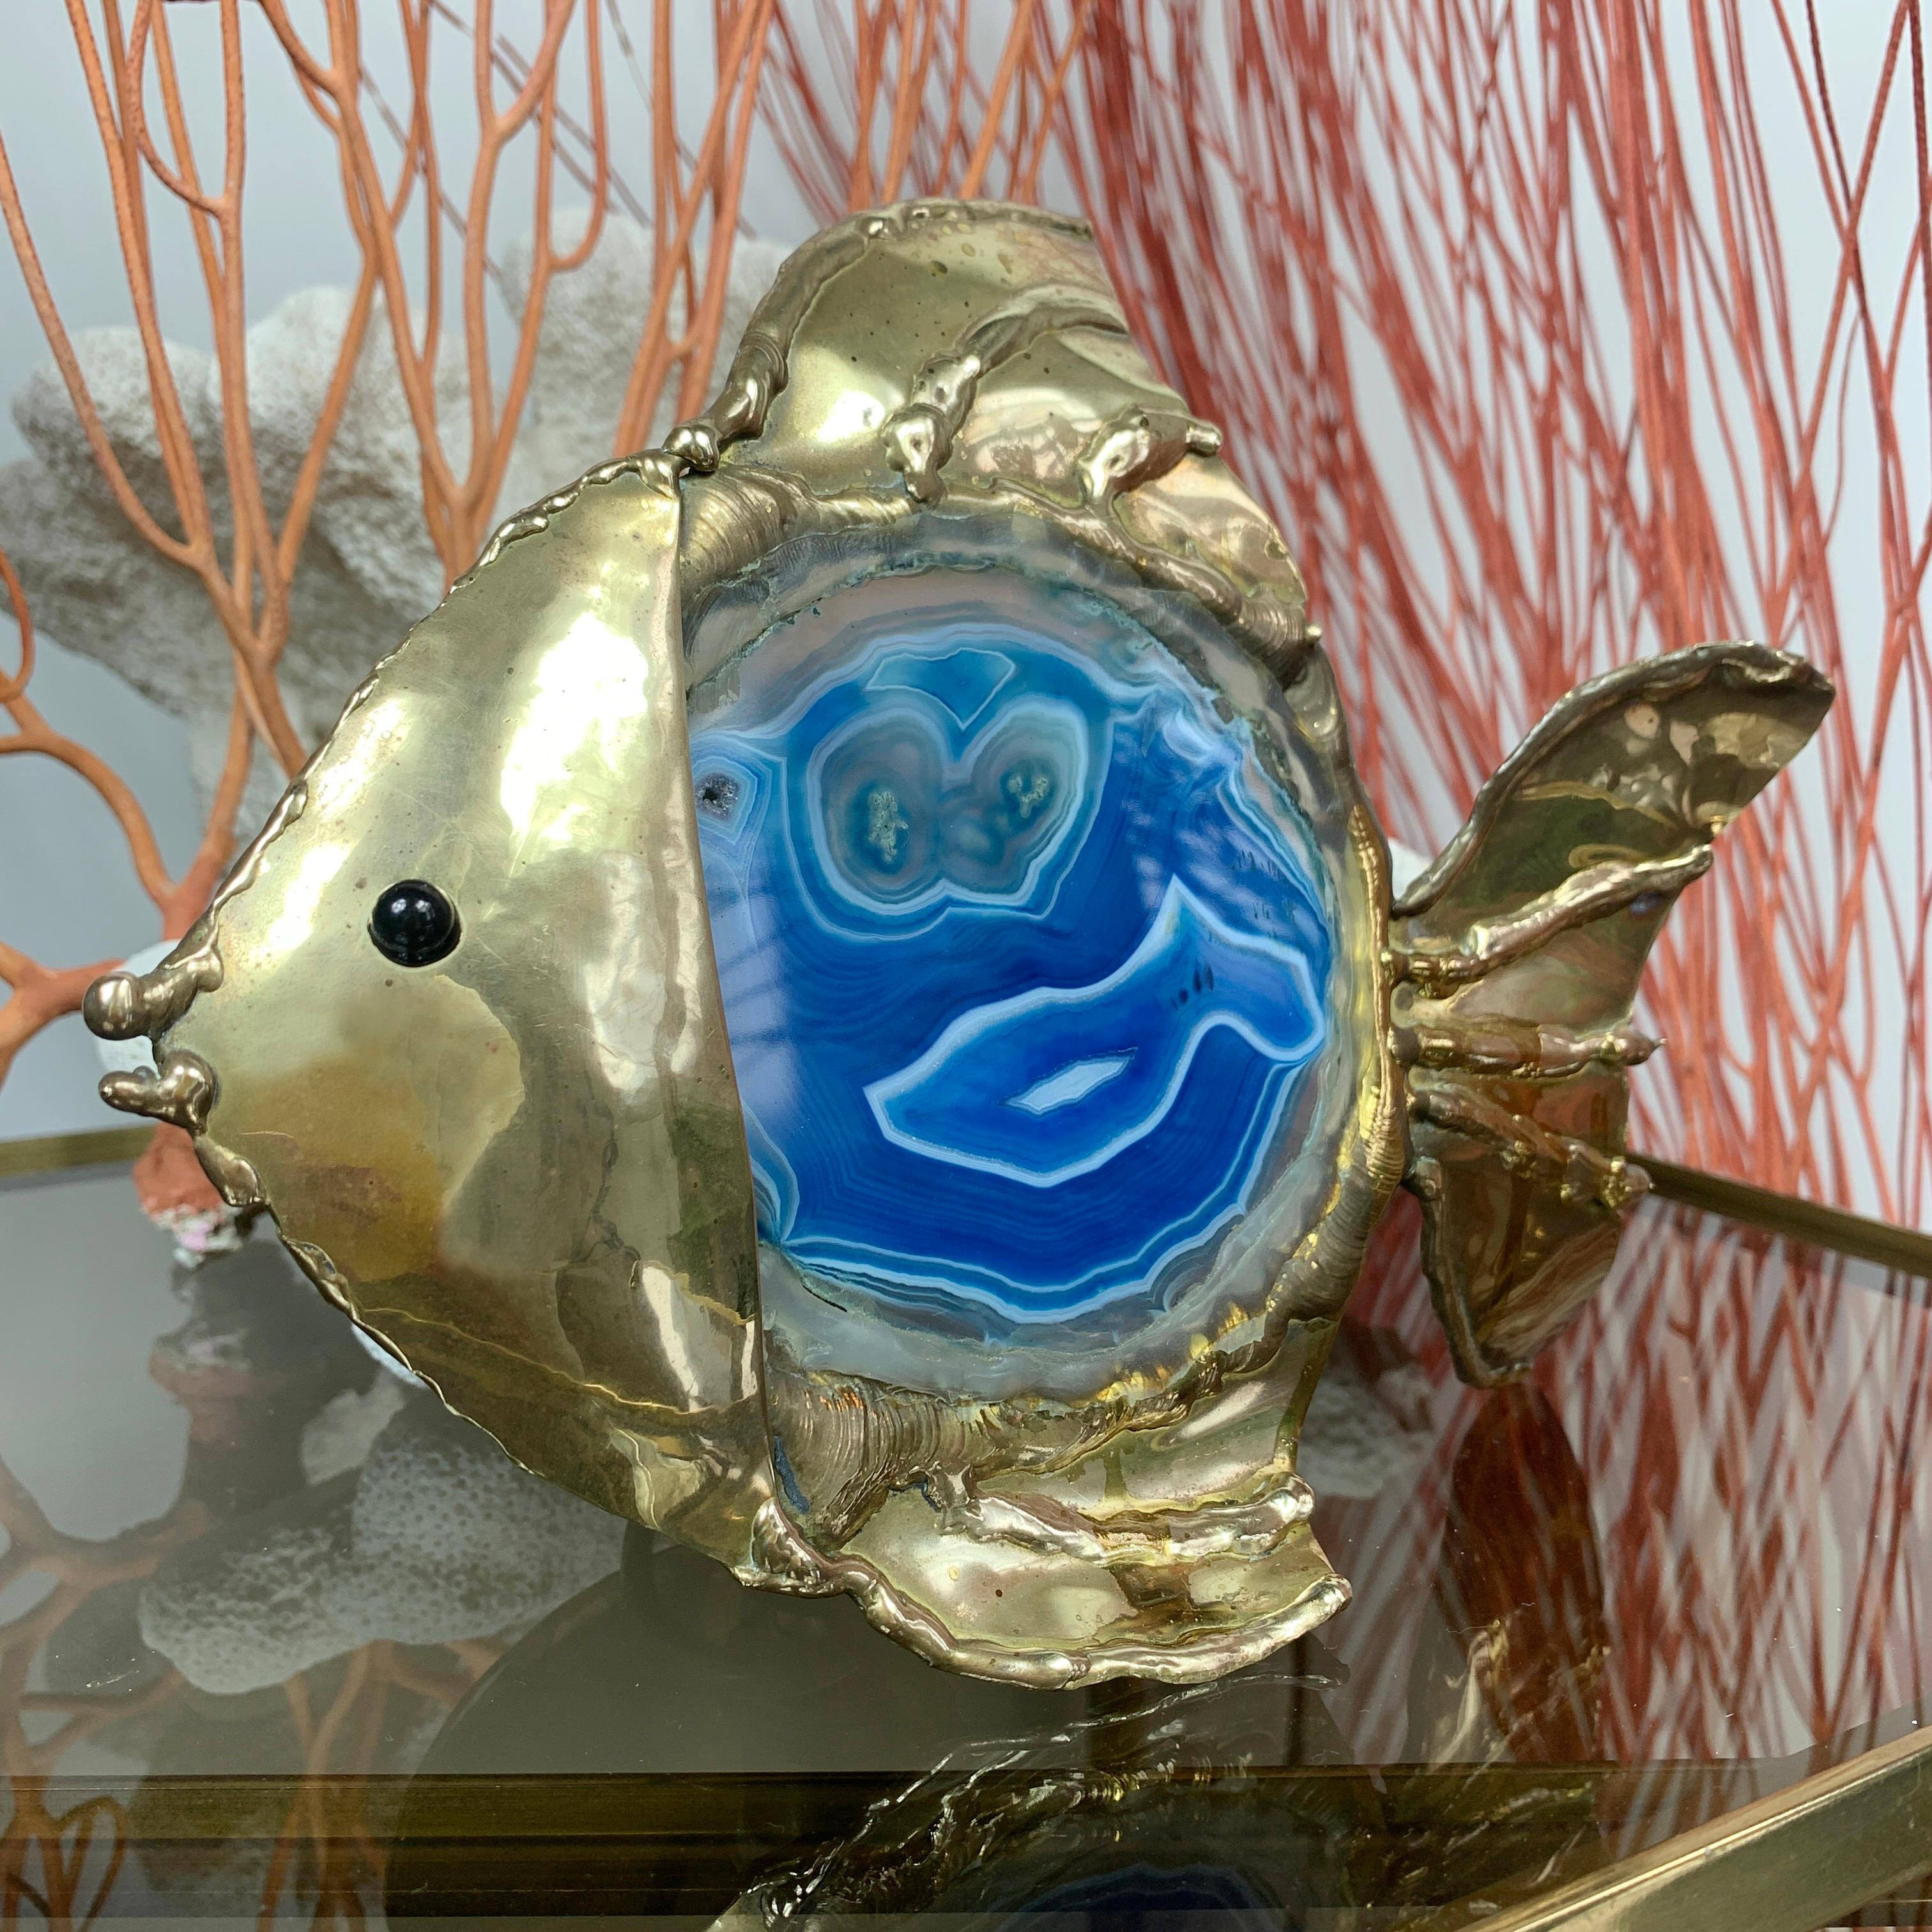 Hand crafted Jacques Duval-Brasseur fish lamp, dating to the 1970's, the exceptional brutalist brass and blue agate piece is a fine example of Brasseur's work. The lamp is an E14 (small screw) bulb fitting.

Duval-Brasseur is a world renowned